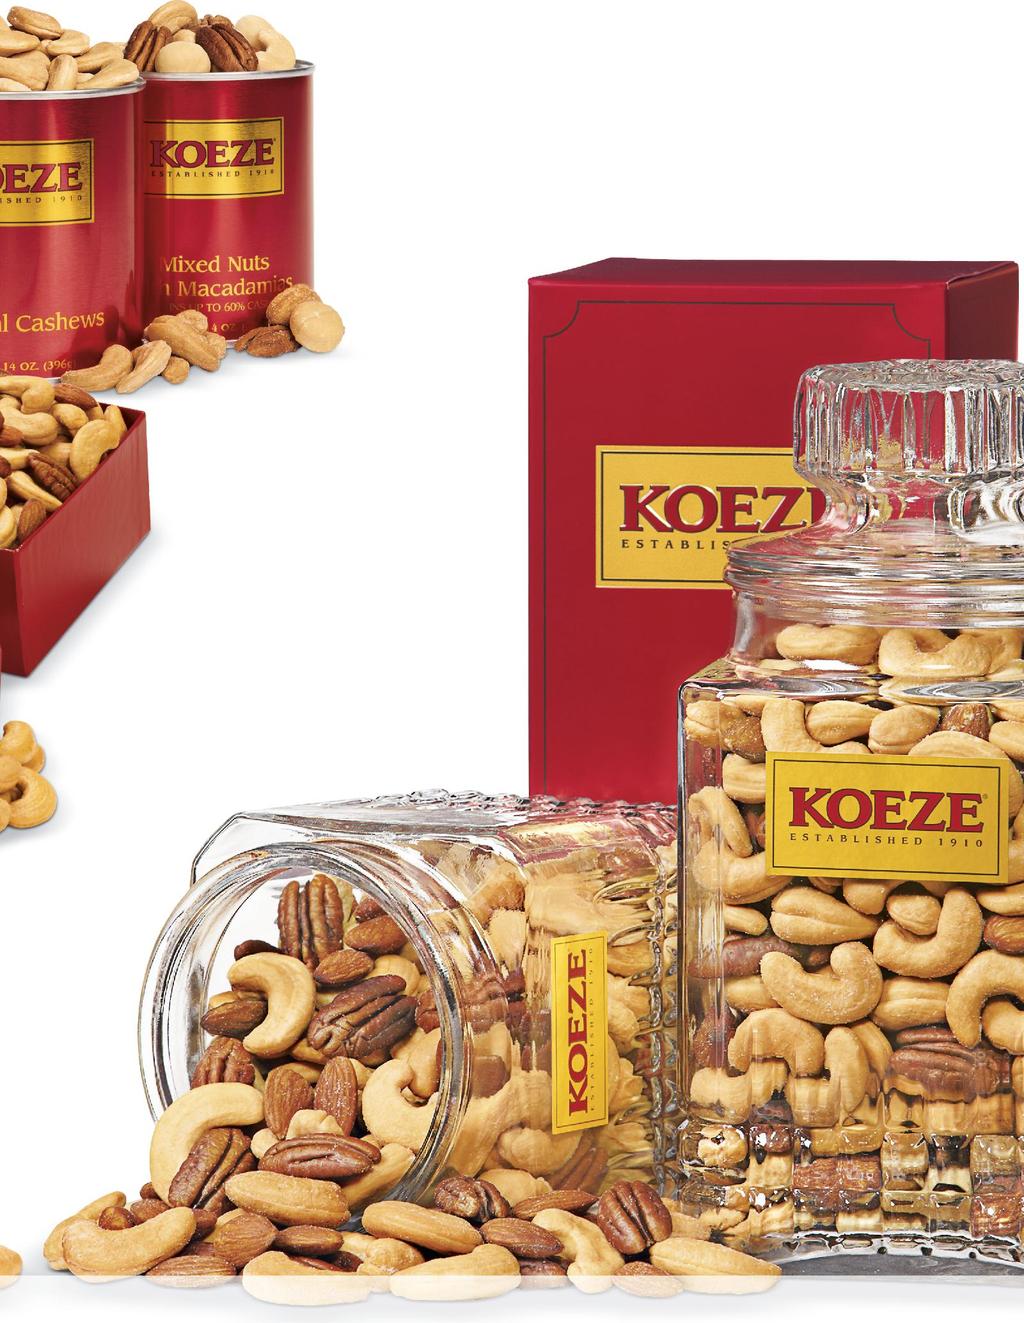 CLASSIC MIXED NUTS FESTIVE NUT GIFTS Our festive red tins of nuts are always in demand for gifts or serving at your own holiday get-togethers. #31262 Colossal Cashews 14 oz. Gift Tin 23.